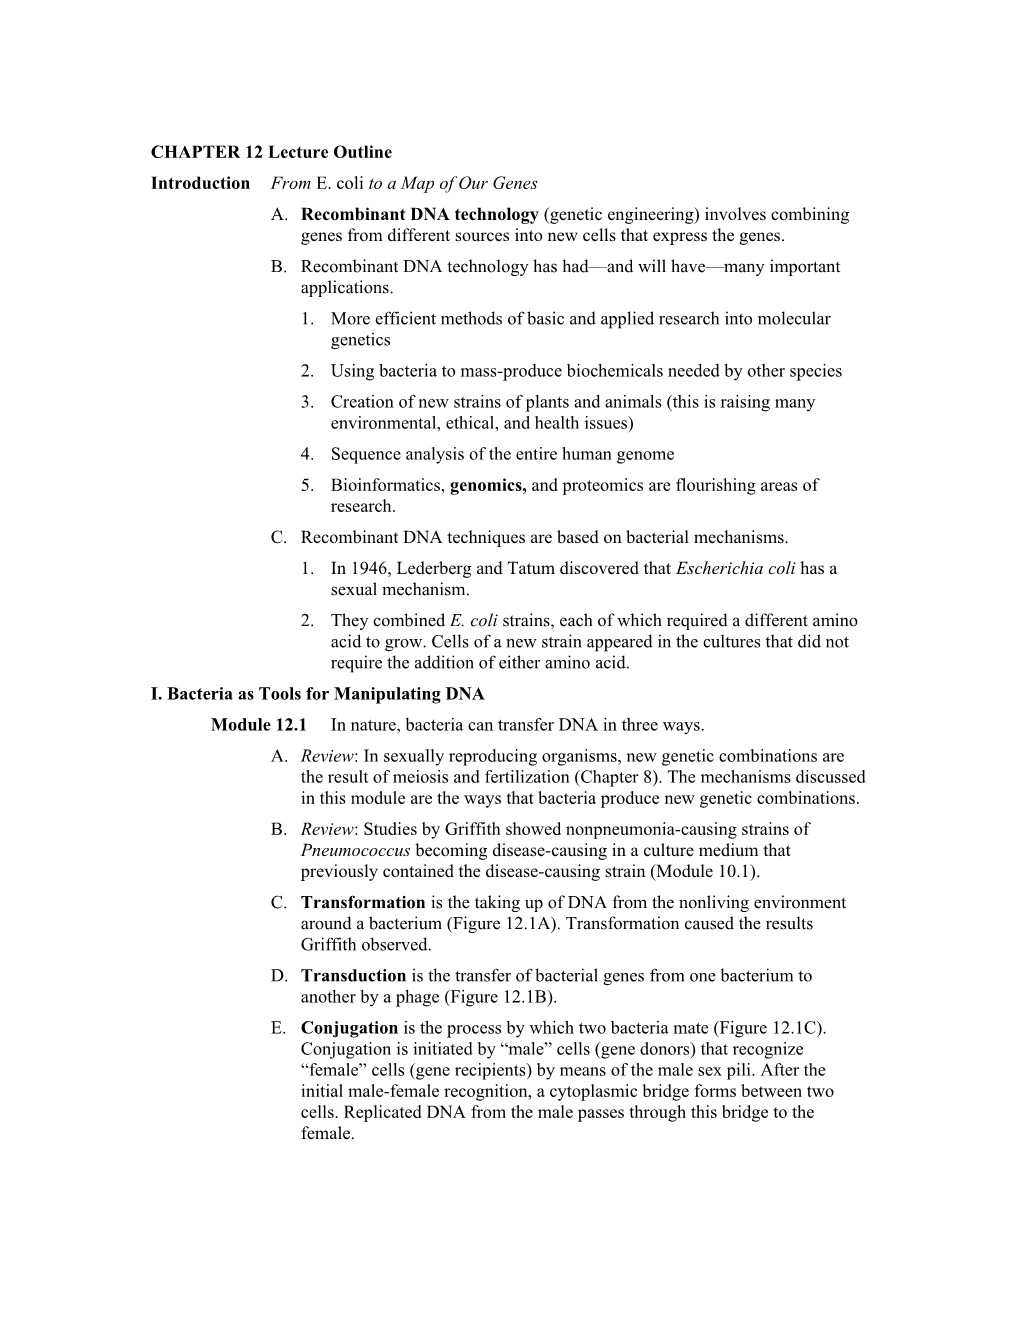 CHAPTER 12 Lecture Outline